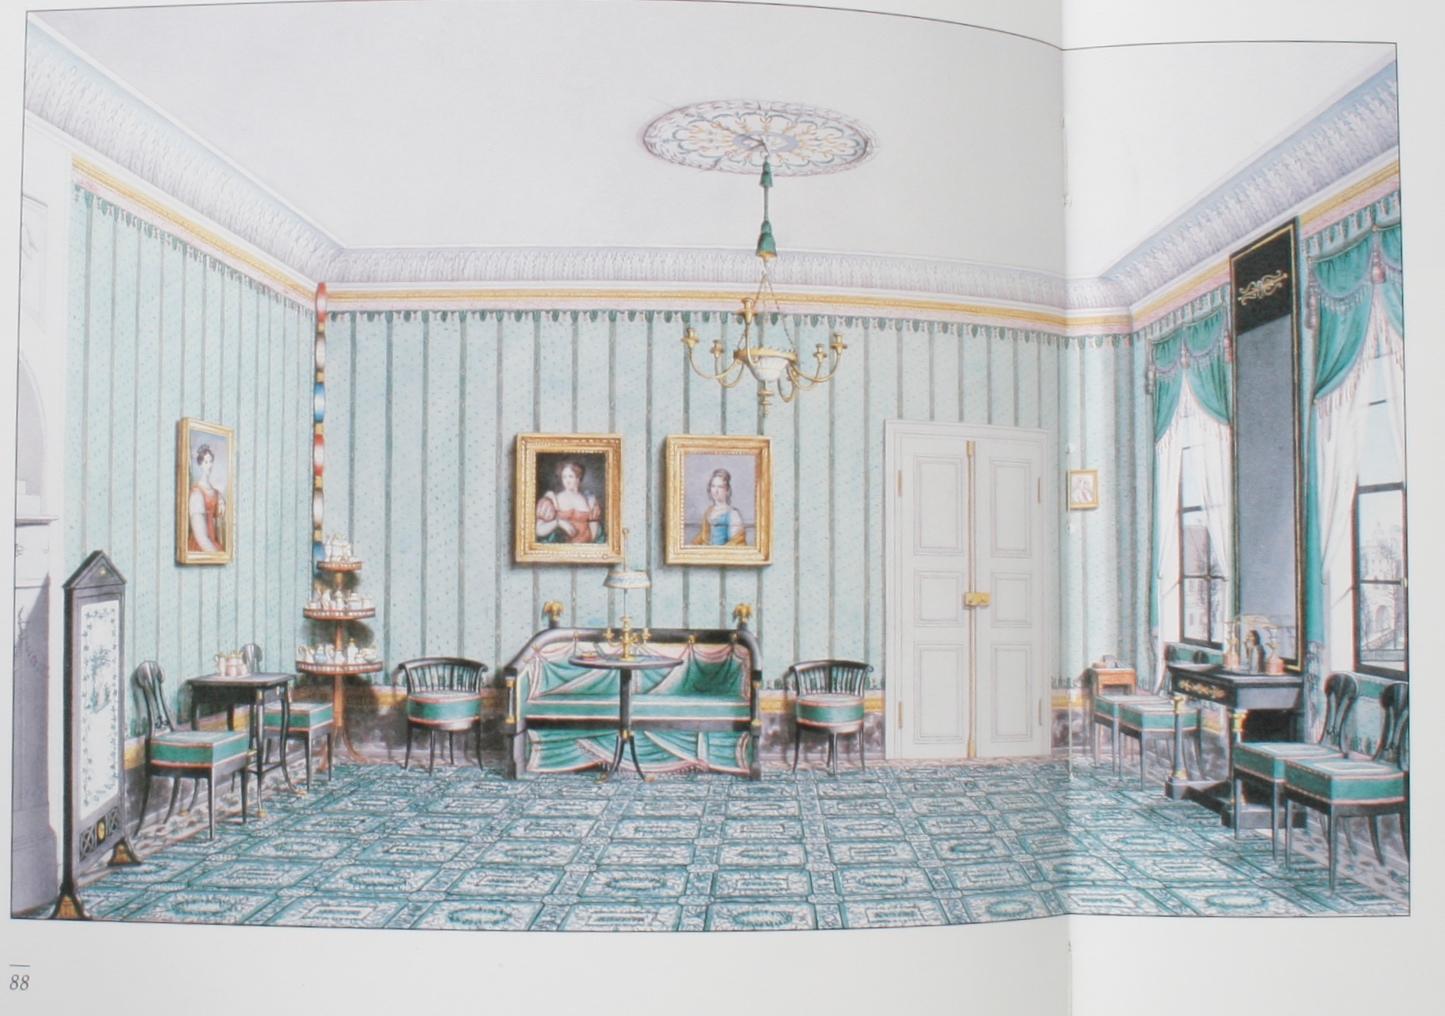 Art of Biedermeier Viennese Art and Design by Dominic R Stone, First Edition 1